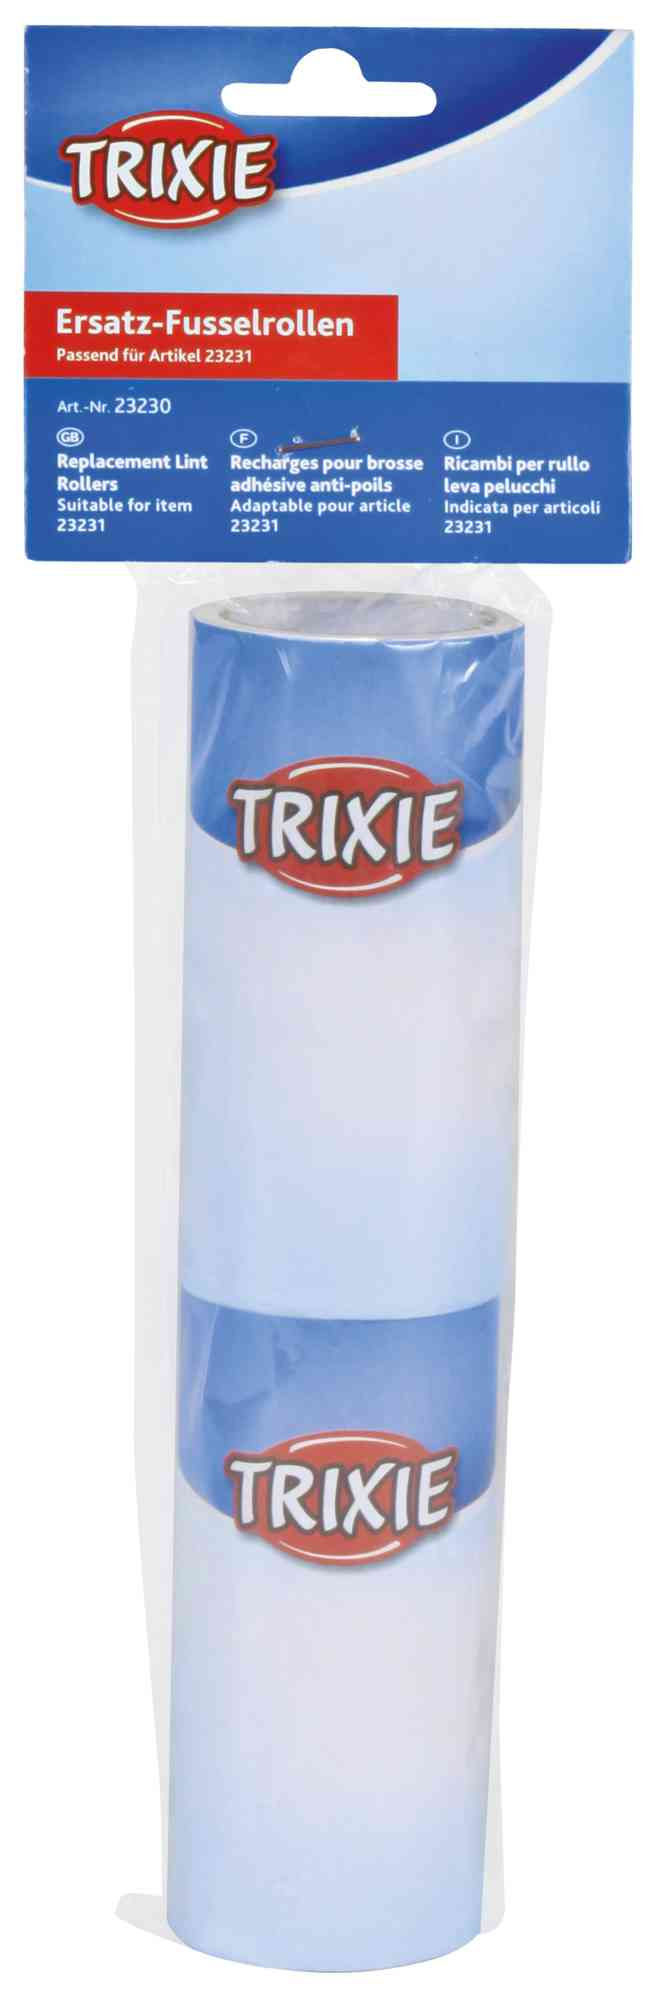 Trixie Replacement Lint Rollers, 2 Rolls Of 60 Sheets